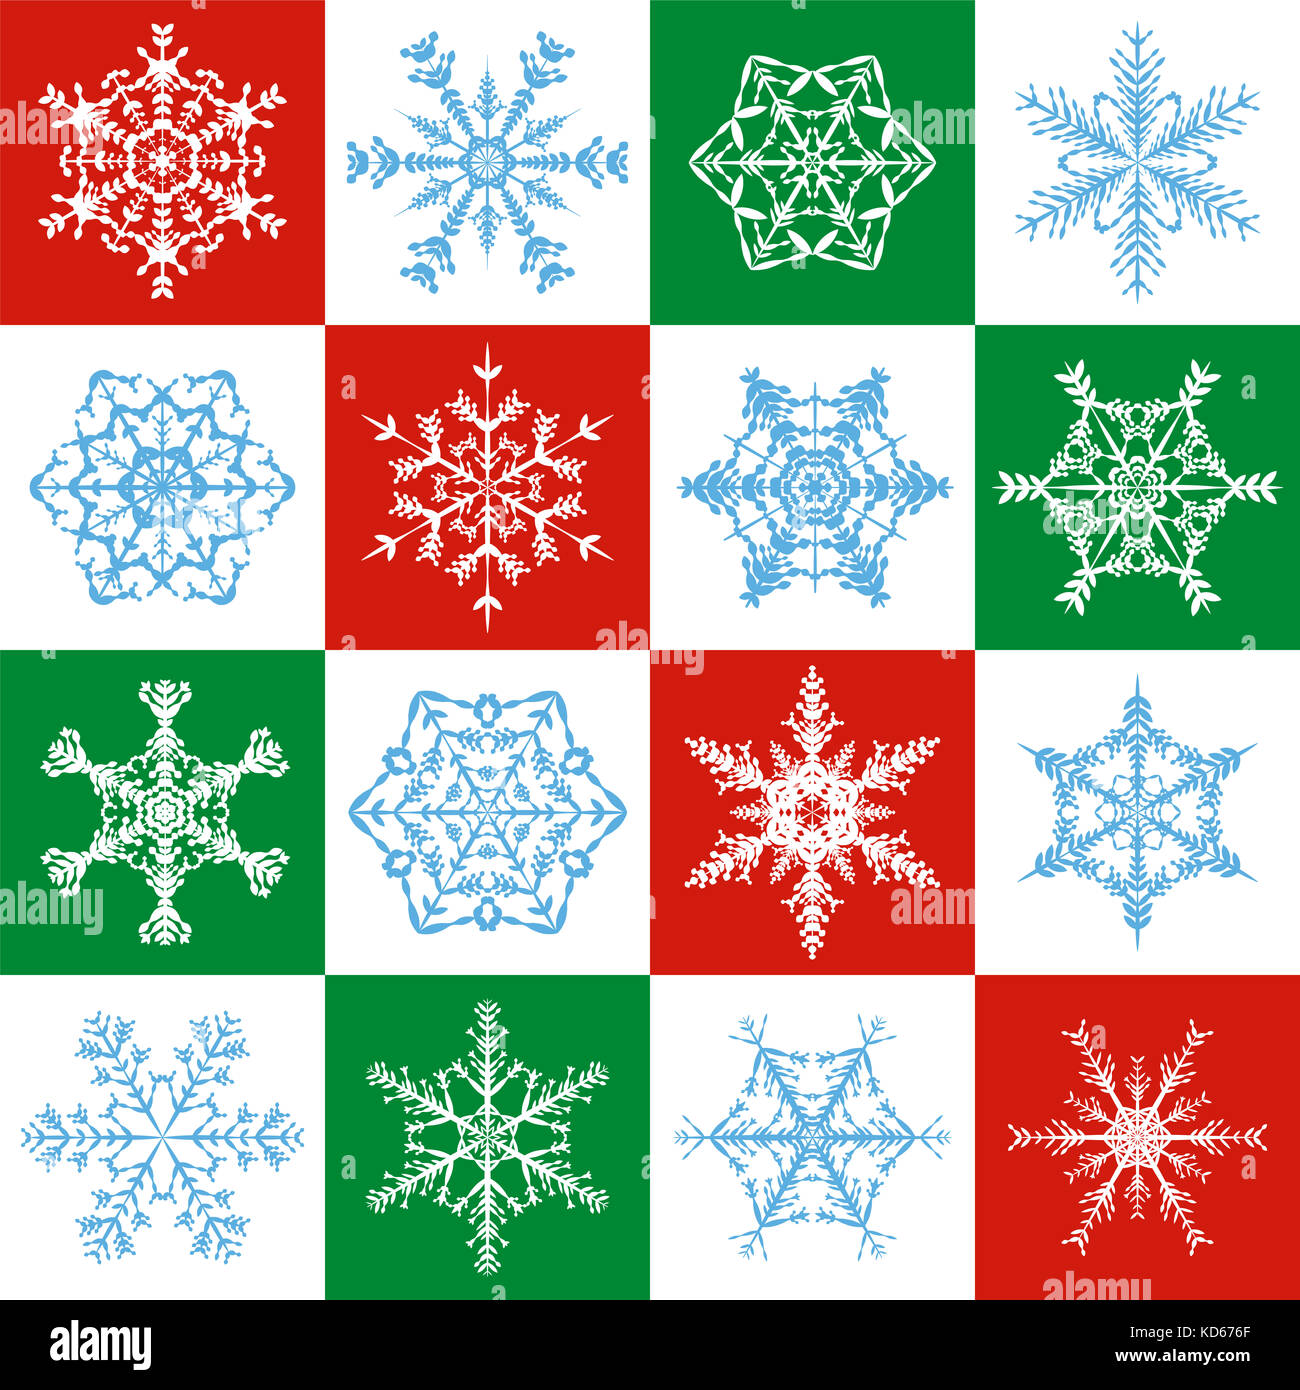 Snowflakes pattern - delicate red, green, white christmas background with sixteen different designs - seamless extendable square size. Stock Photo